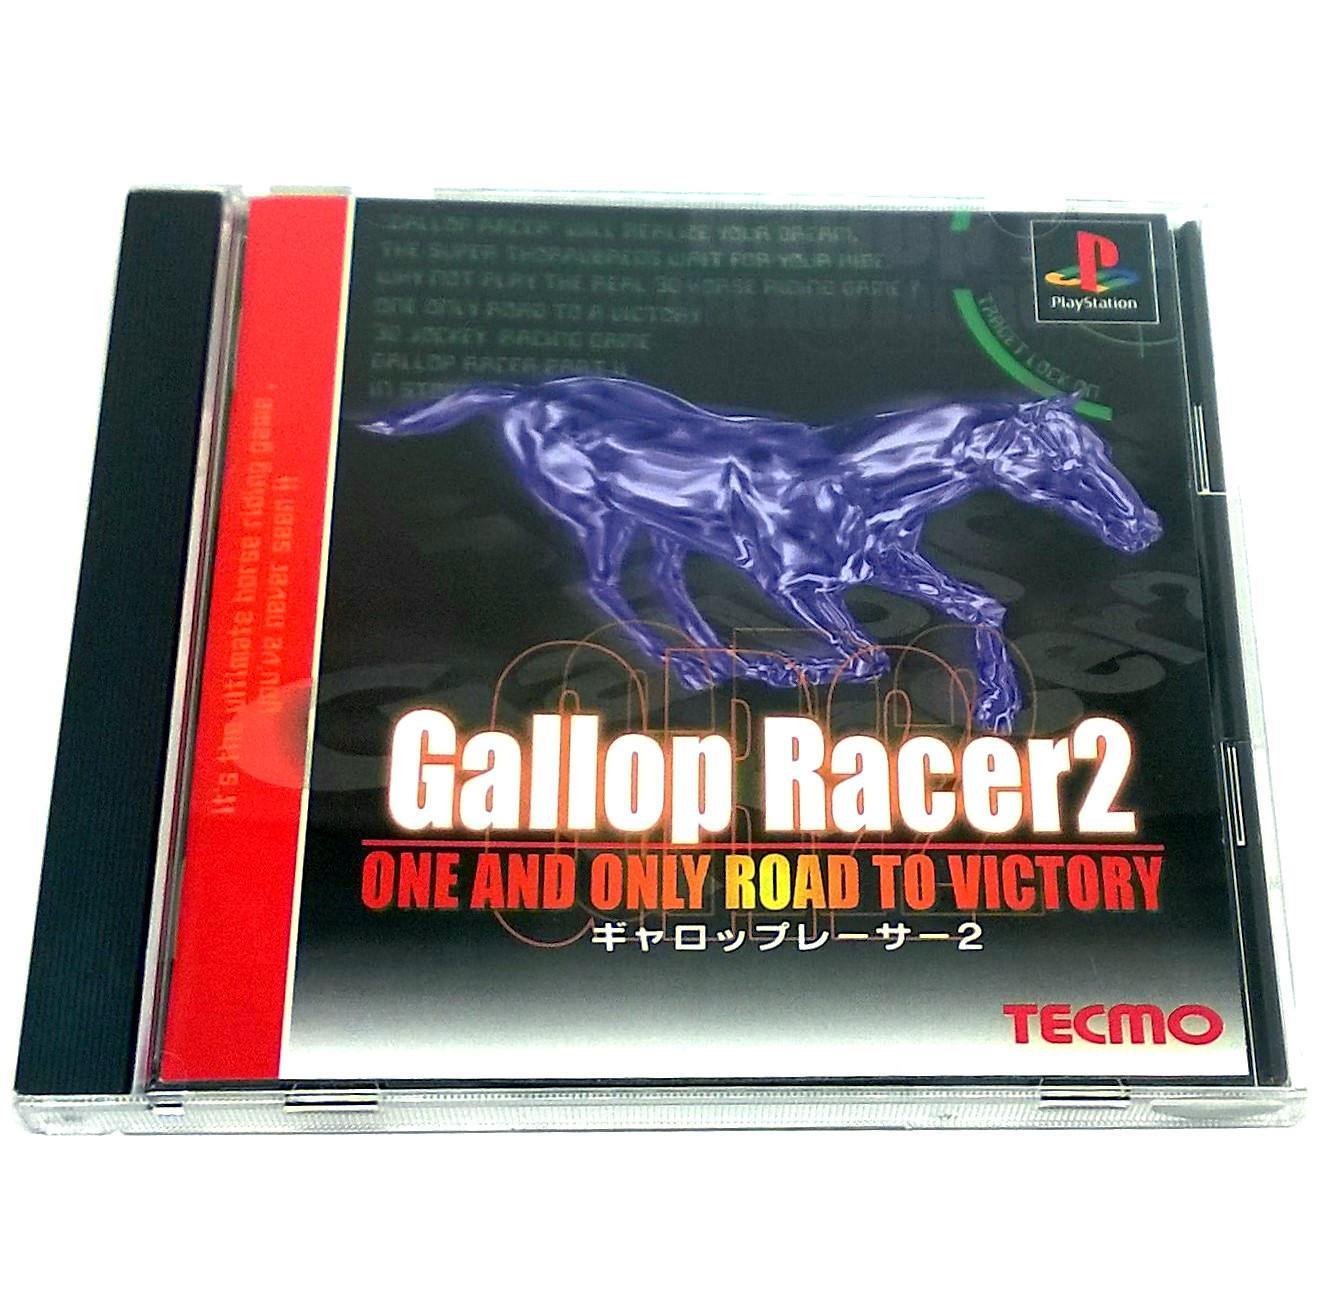 Gallop Racer 2: One and Only Road to Victory for PlayStation (Import) - Front of case